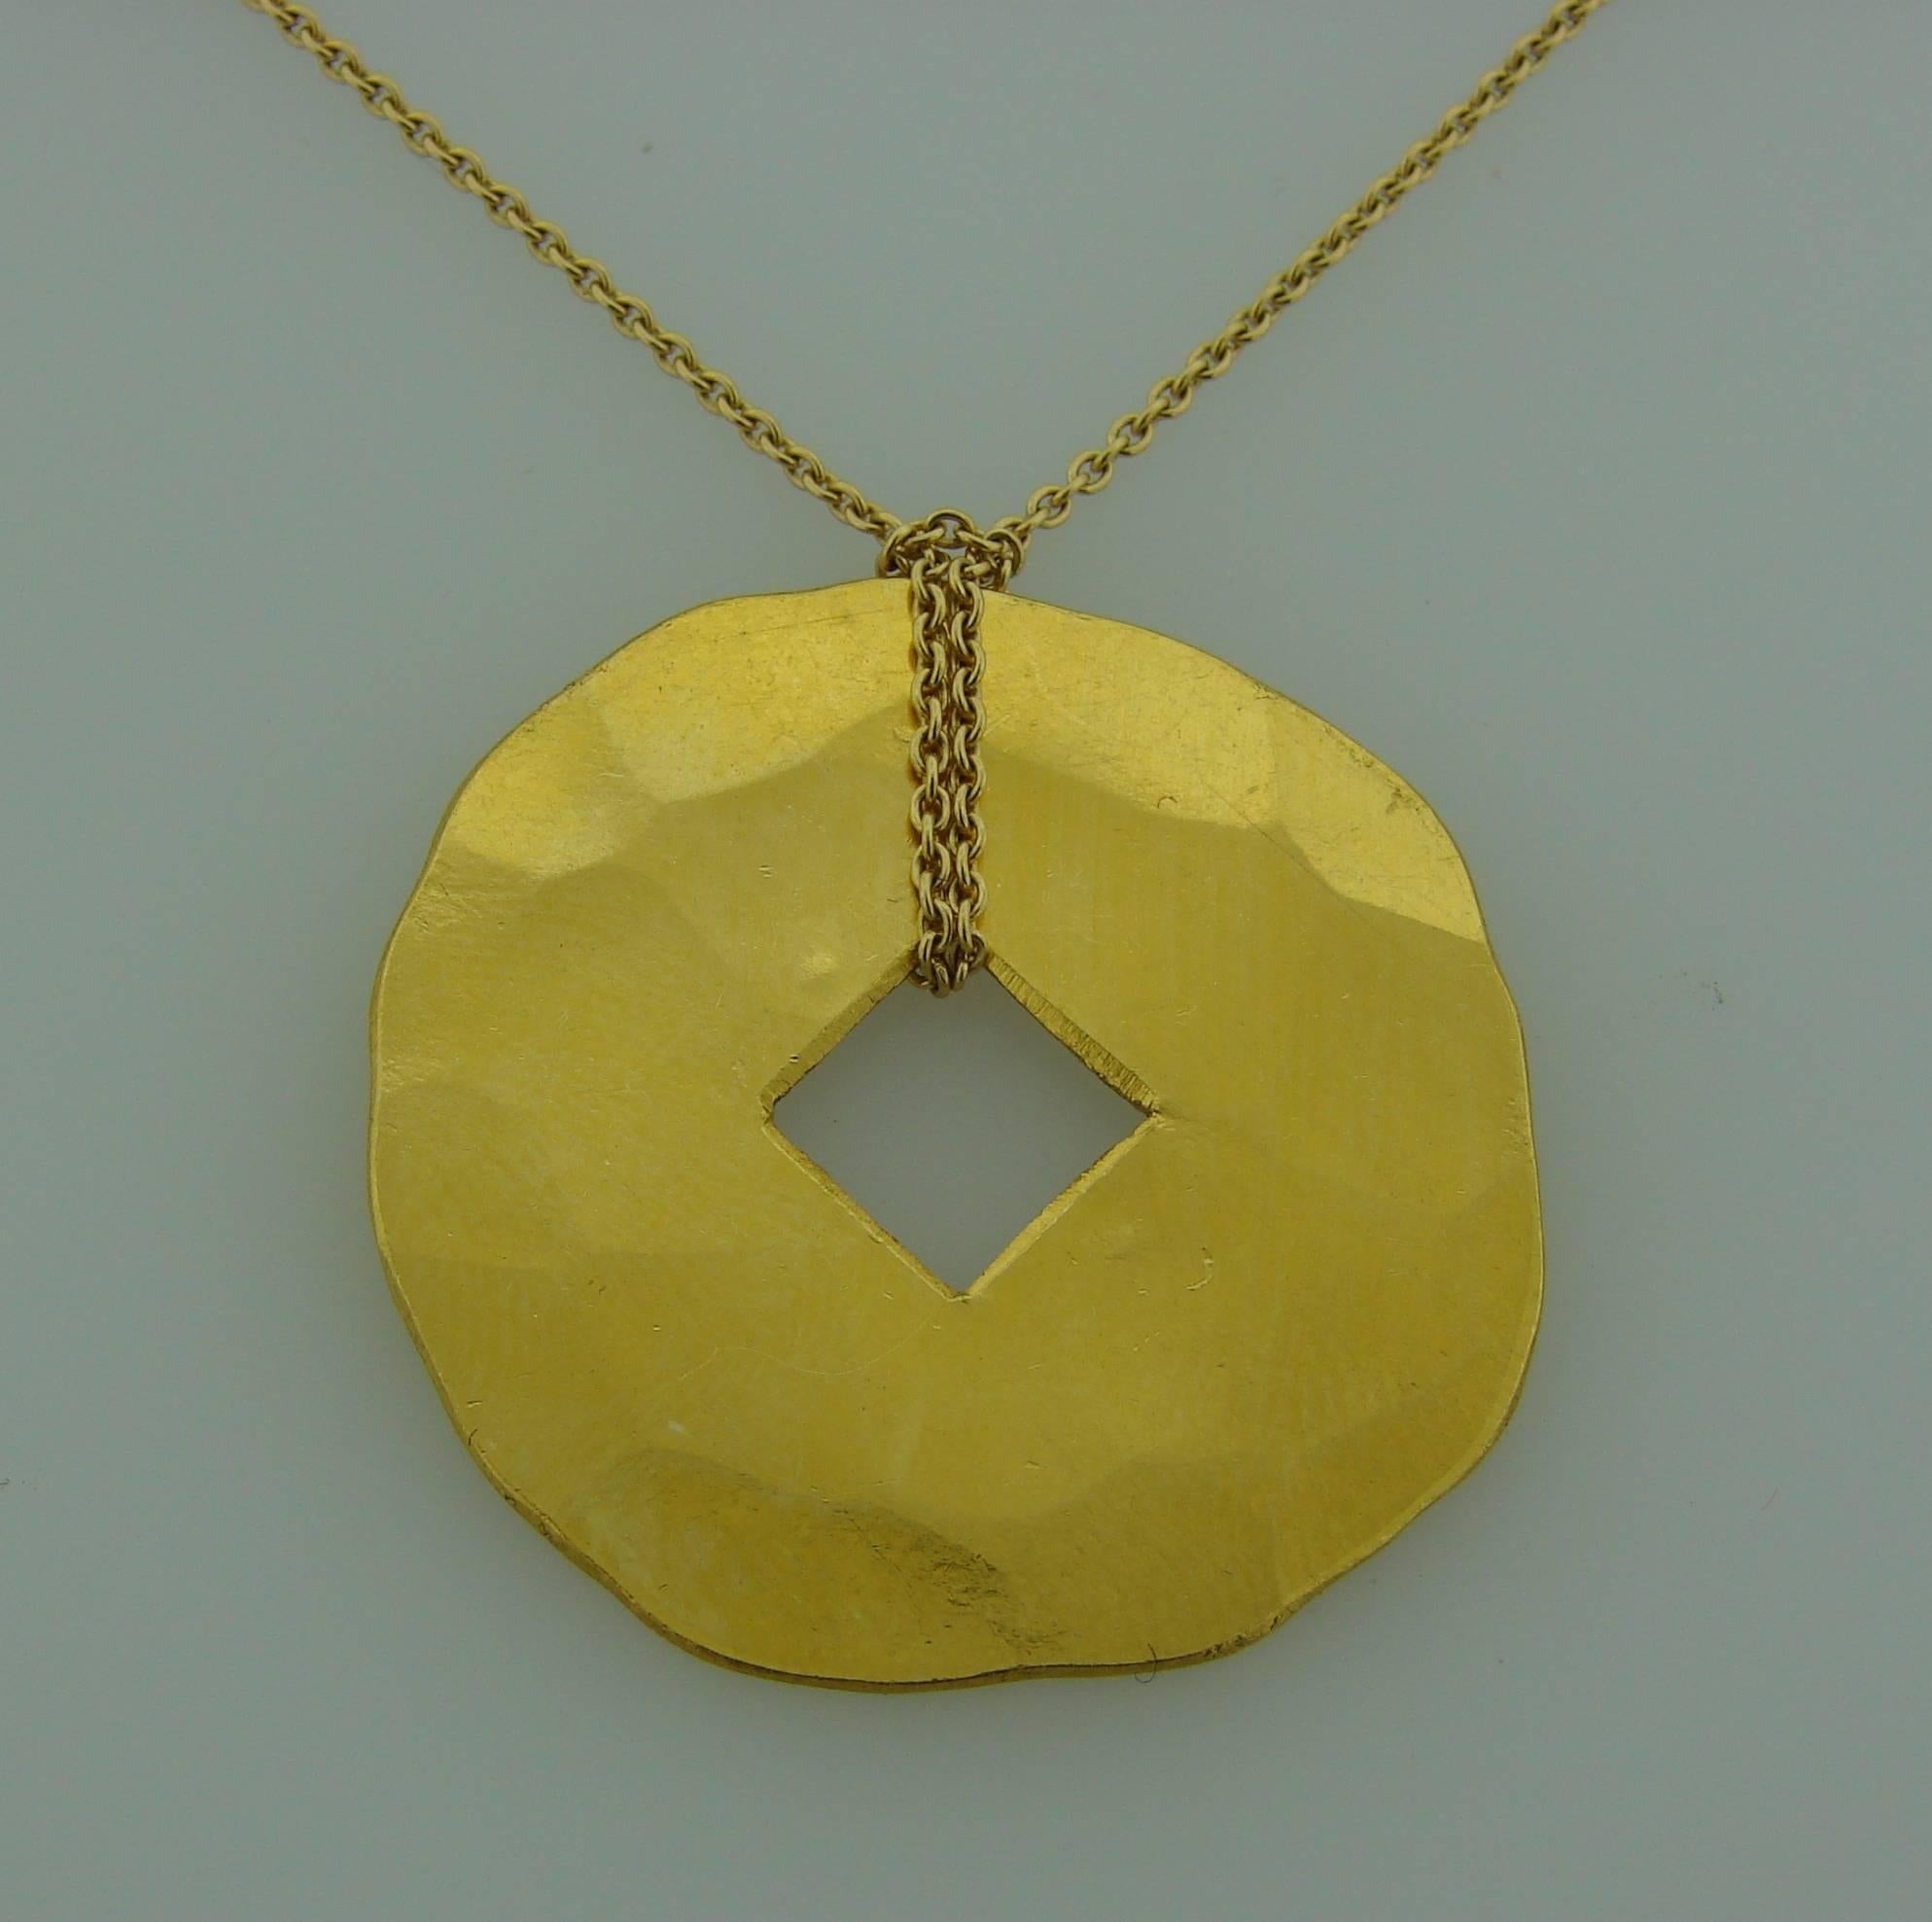 Beautiful hand-hammered yellow gold pendant made of 24k (stamped) yellow gold on 18k (stamped) yellow gold chain. Created by Dinh Van. 
The pendant is in average 1.25